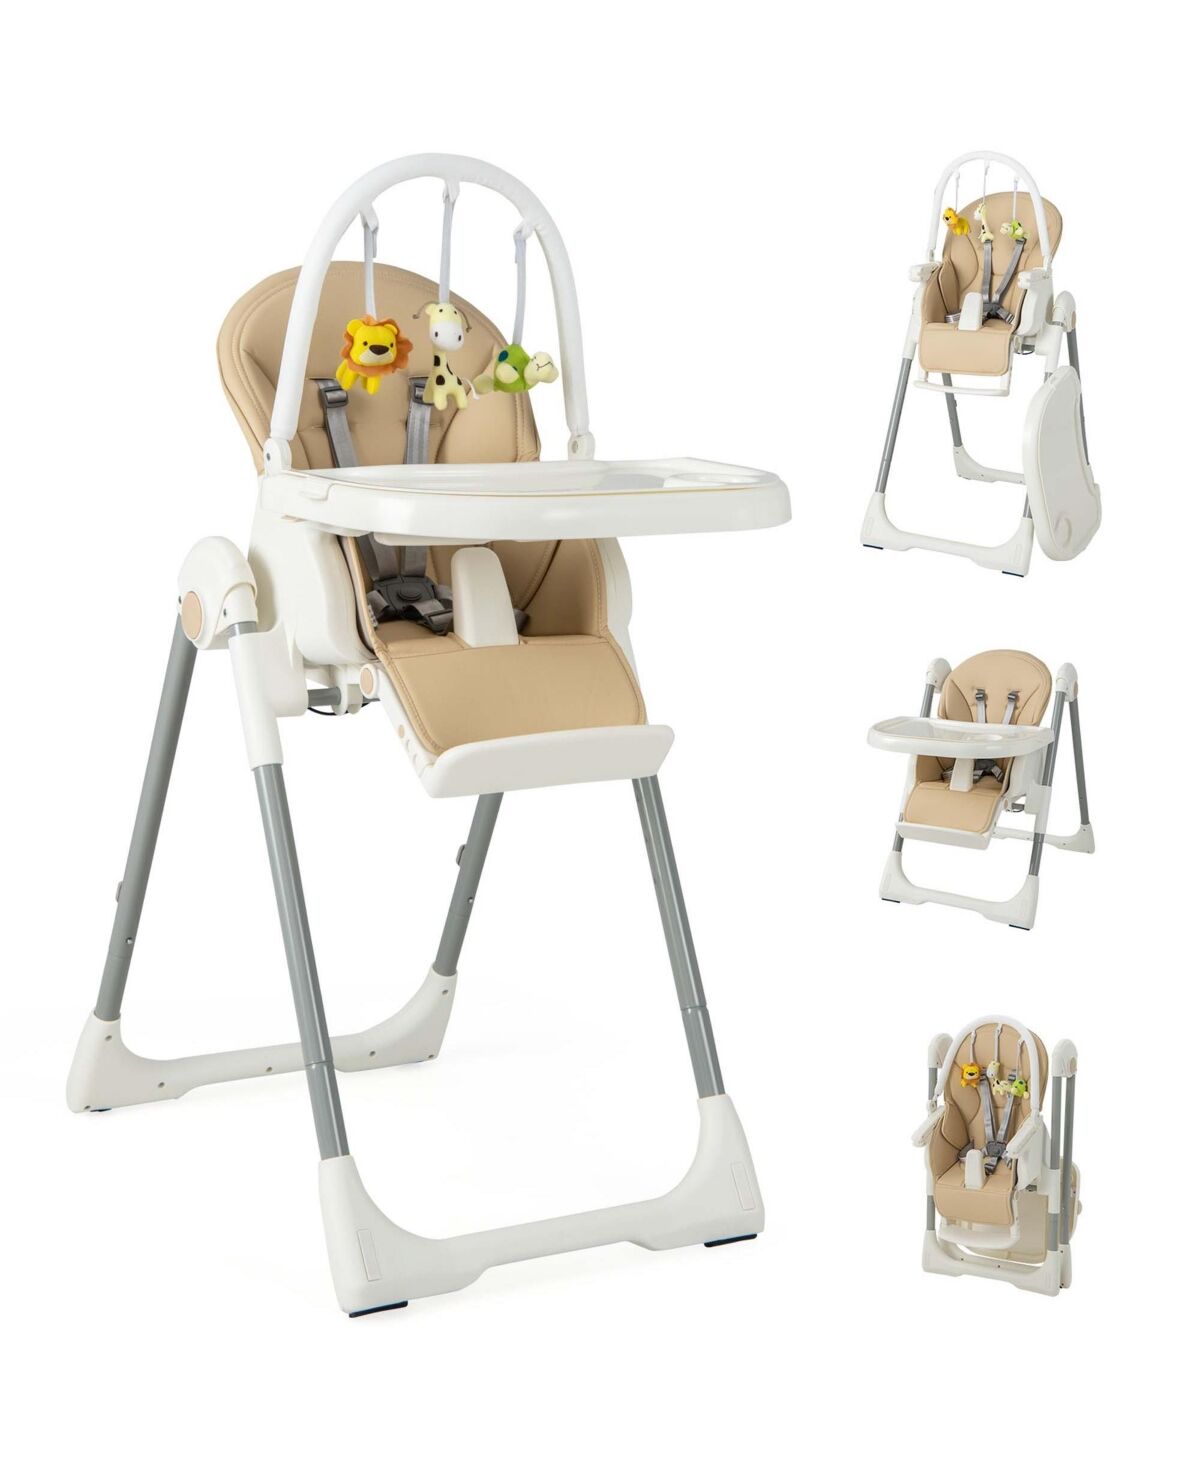 Costway Foldable Baby High Chair with 7 Adjustable Heights & Free Toys Bar for Fun - Yellow